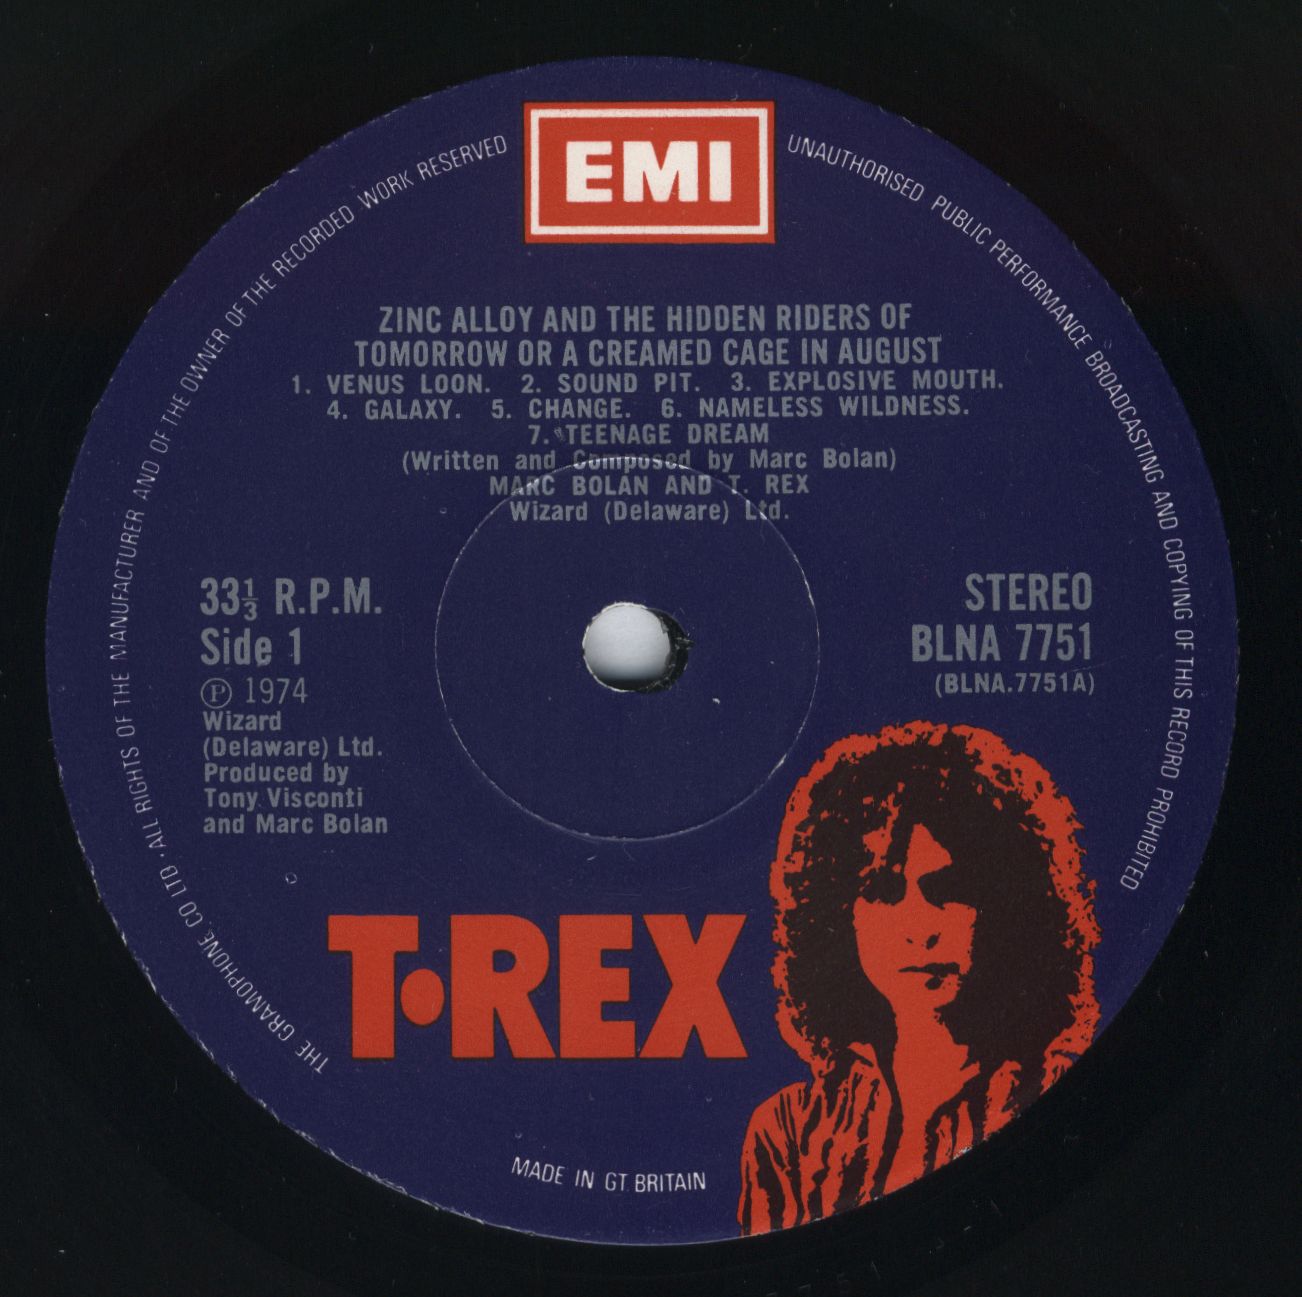 Marc Bolan & T Rex 1974 Zinc Alloy And The Hidden Riders Of Tomorrow (UK)